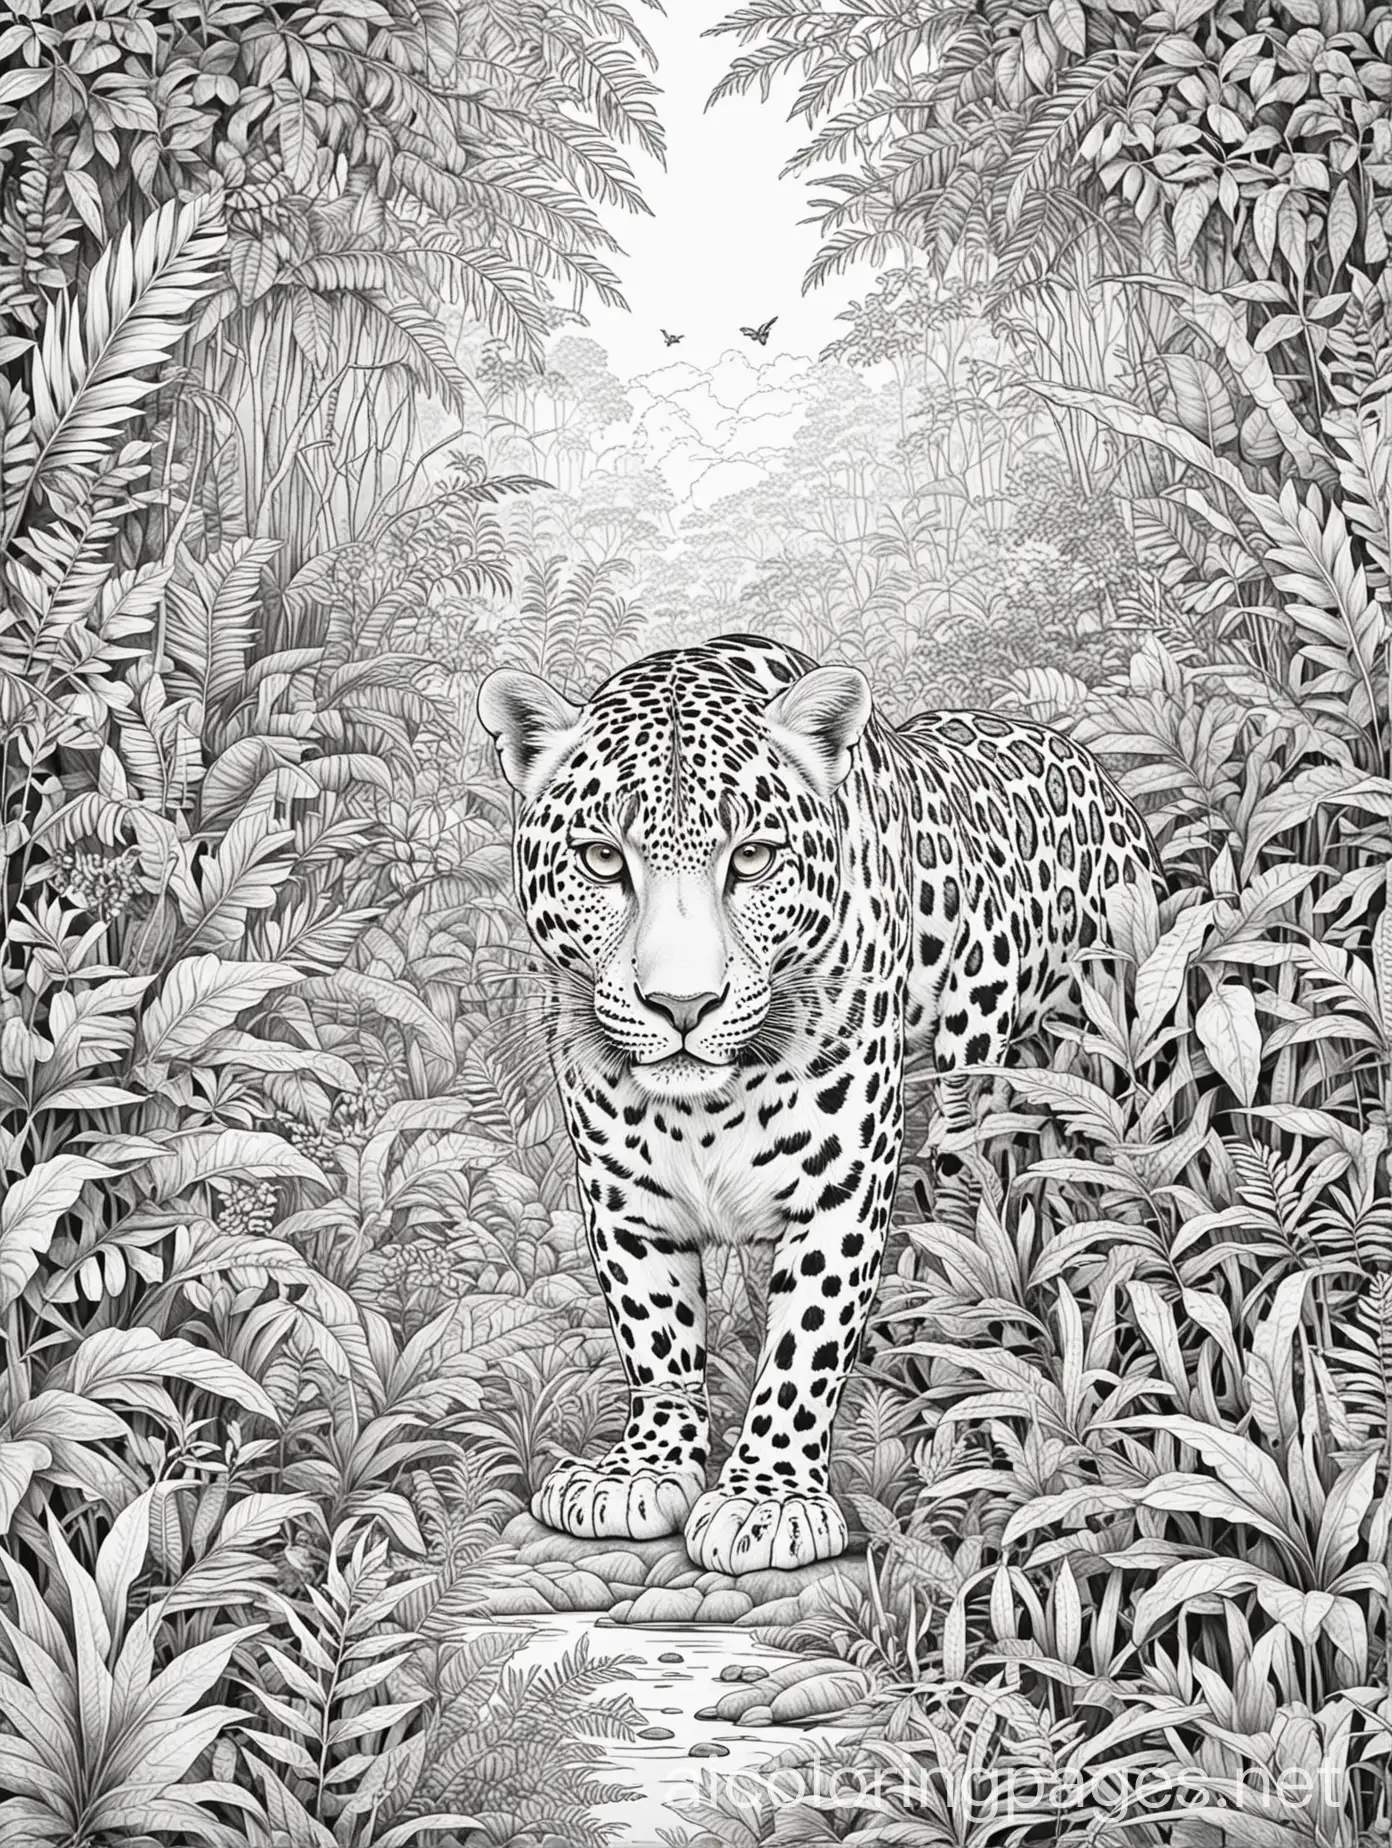 jungle scene with lush plants and wild animals, leopard as the center focal point of coloring book page, Coloring Page, black and white, line art, white background, Simplicity, Ample White Space. The background of the coloring page is plain white to make it easy for young children to color within the lines. The outlines of all the subjects are easy to distinguish, making it simple for kids to color without too much difficulty